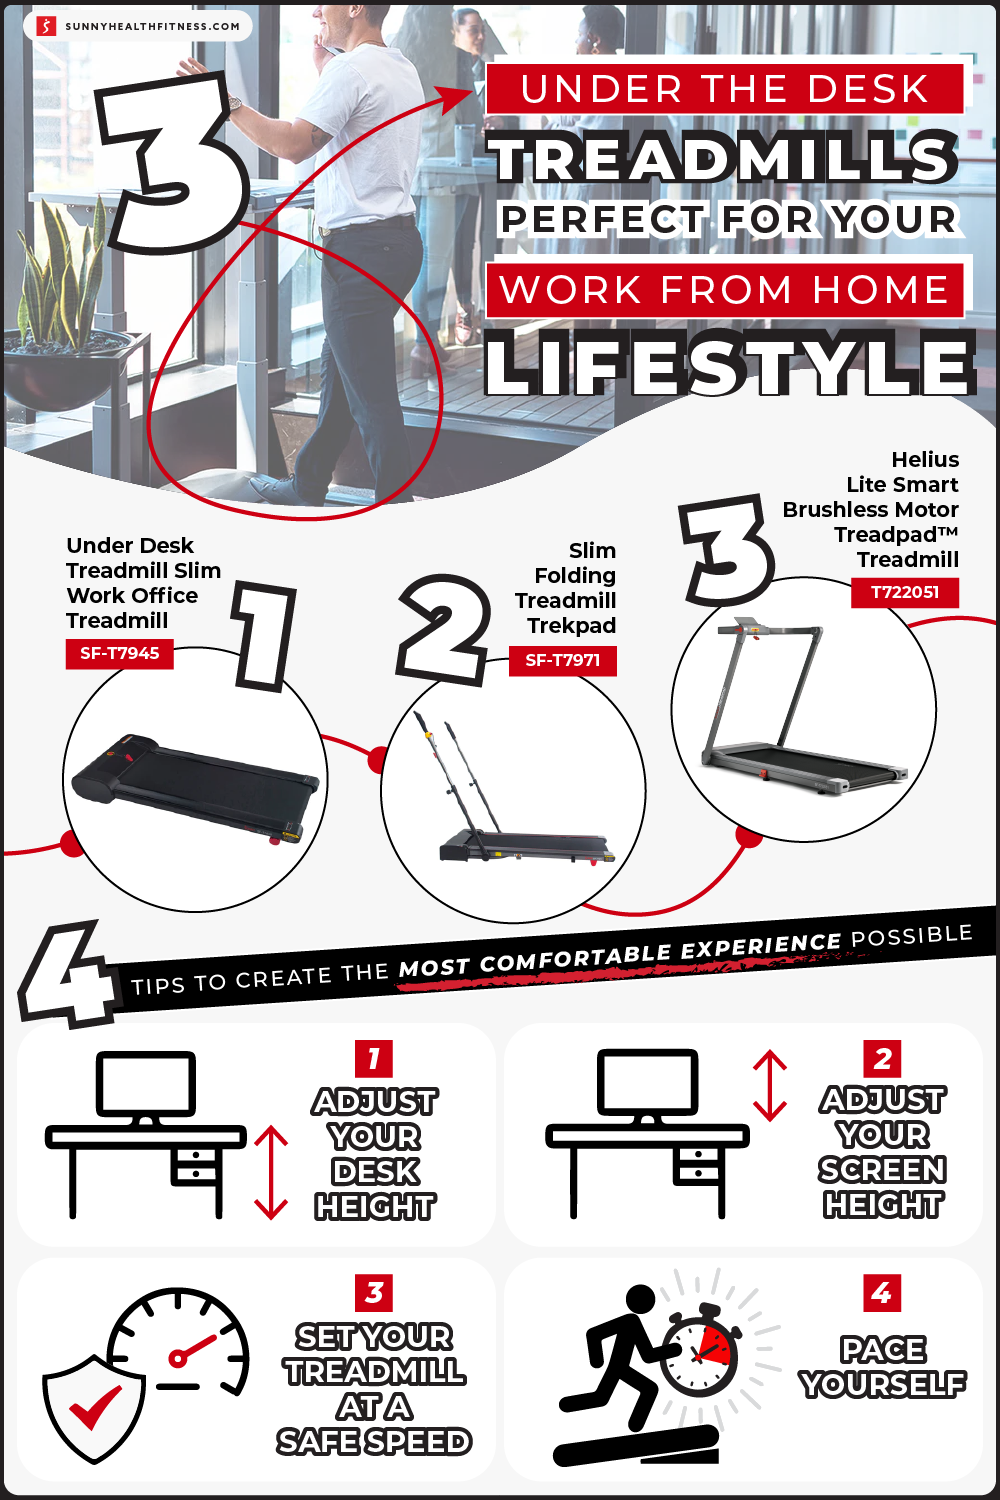 3 Under the Desk Treadmills Perfect for Your Work From Home Lifestyle Infographic